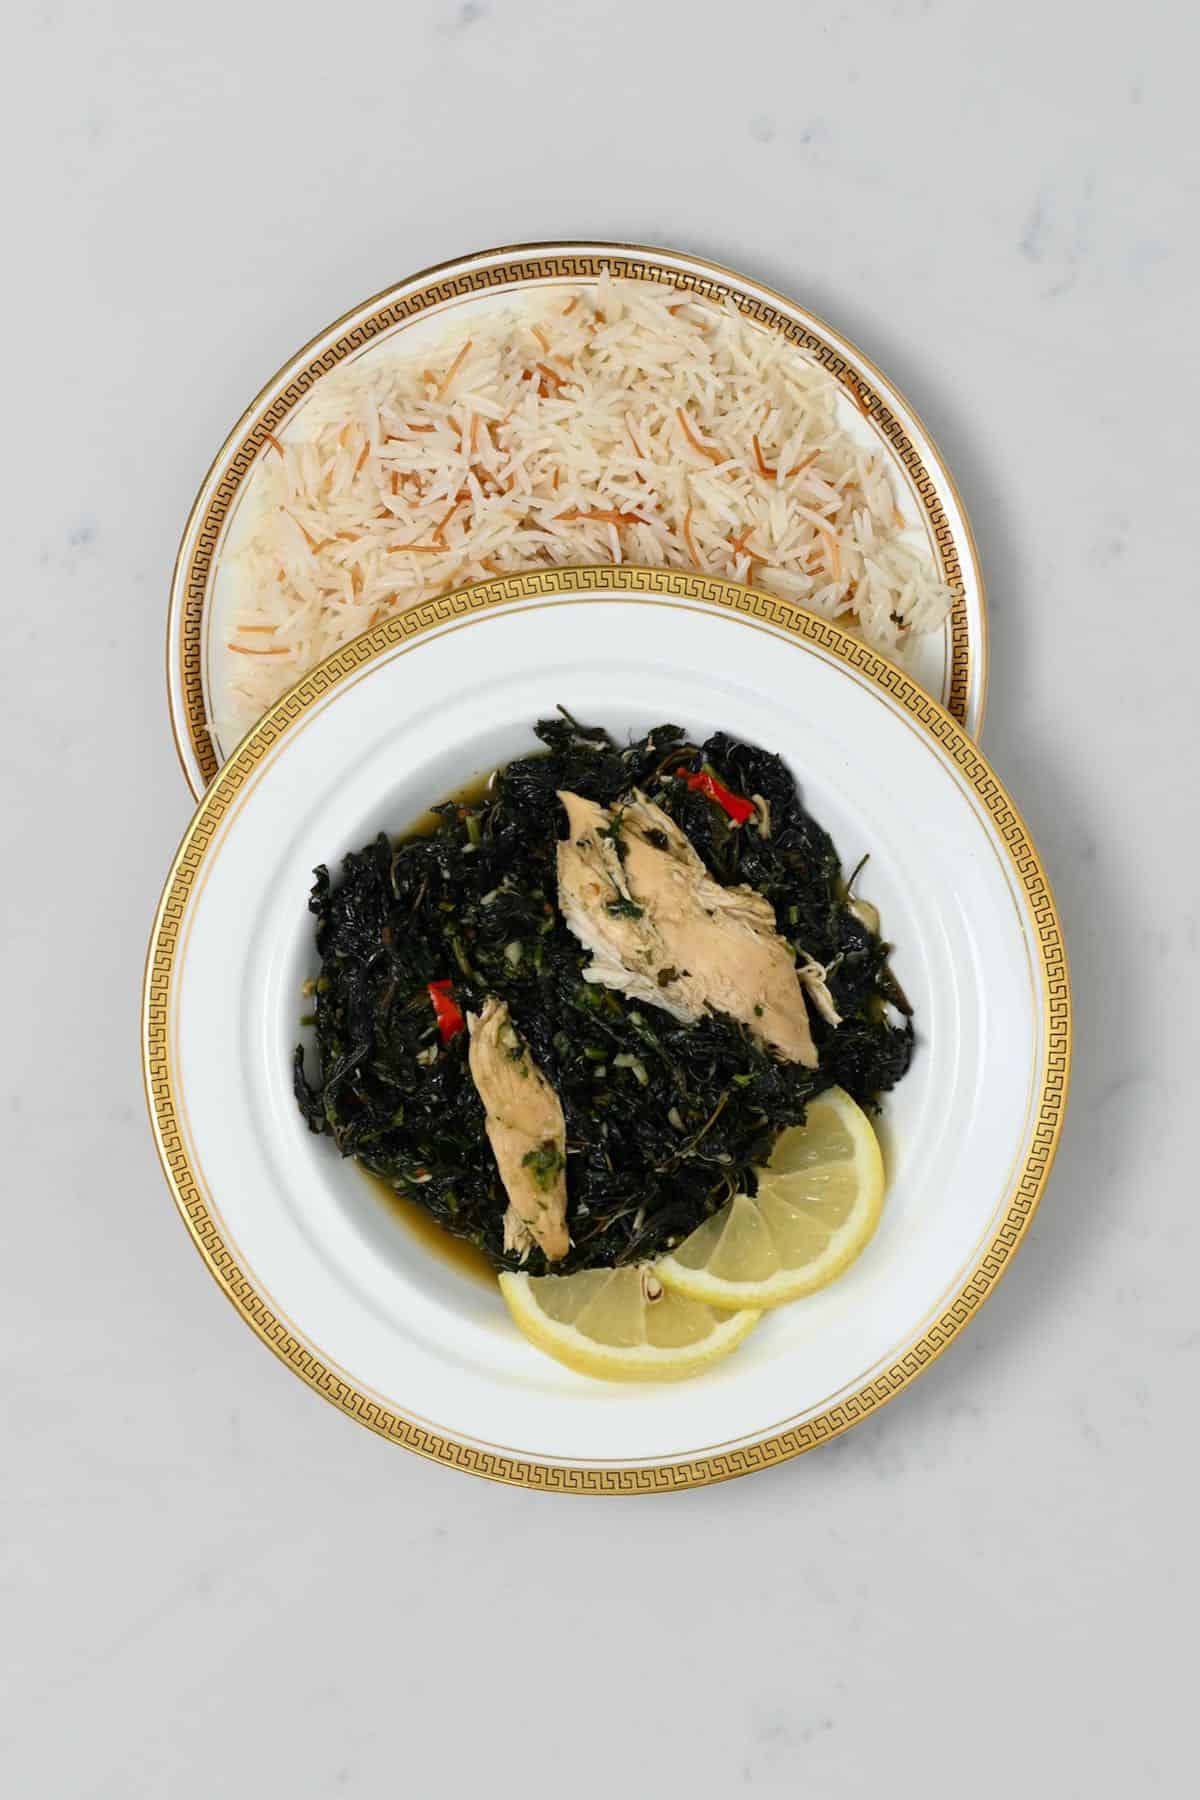 A serving of molokhia with chicken and rice